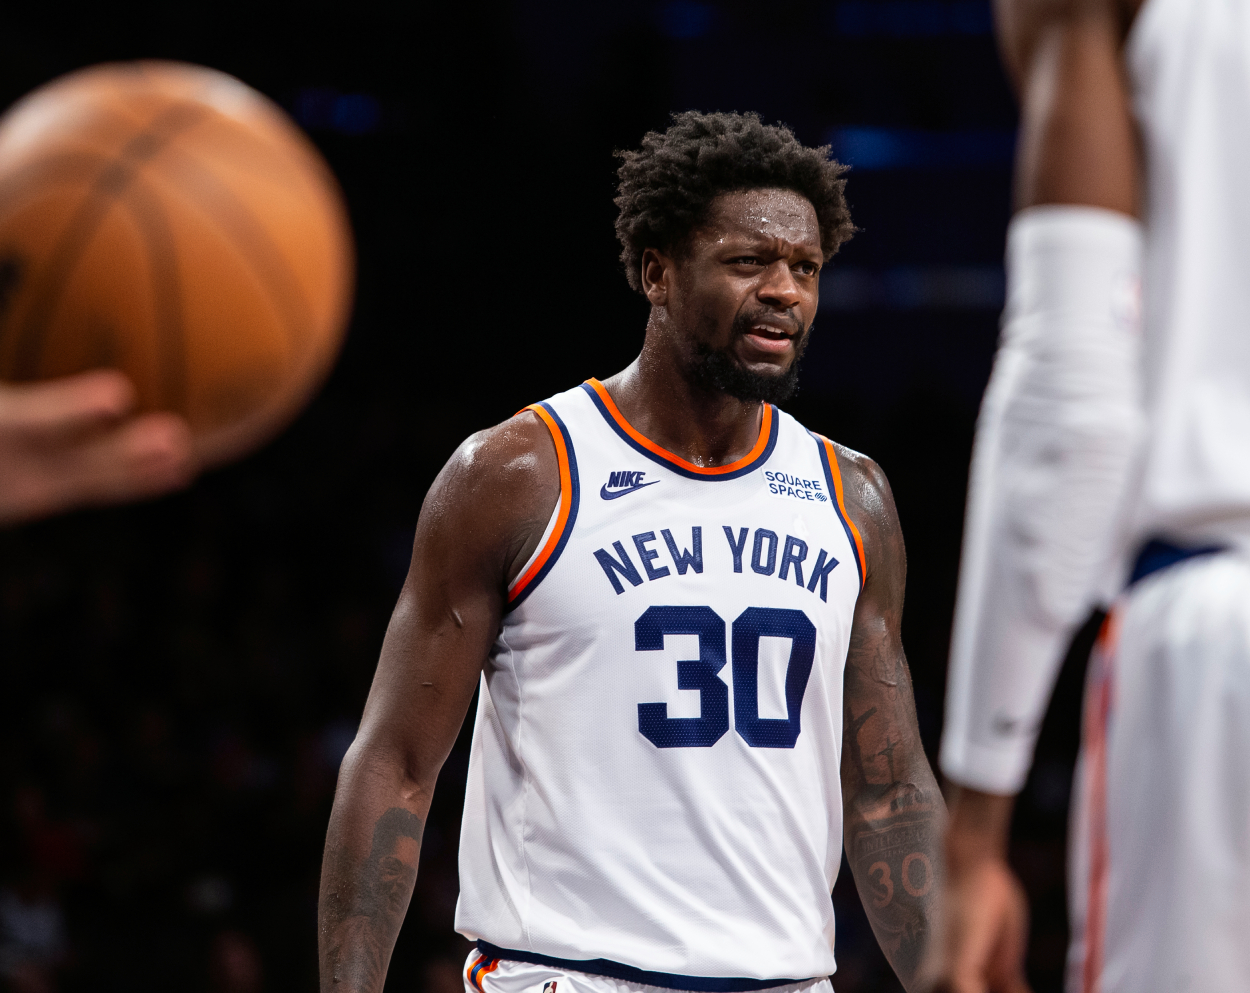 Julius Randle of the New York Knicks reacts during the game against the Brooklyn Nets.